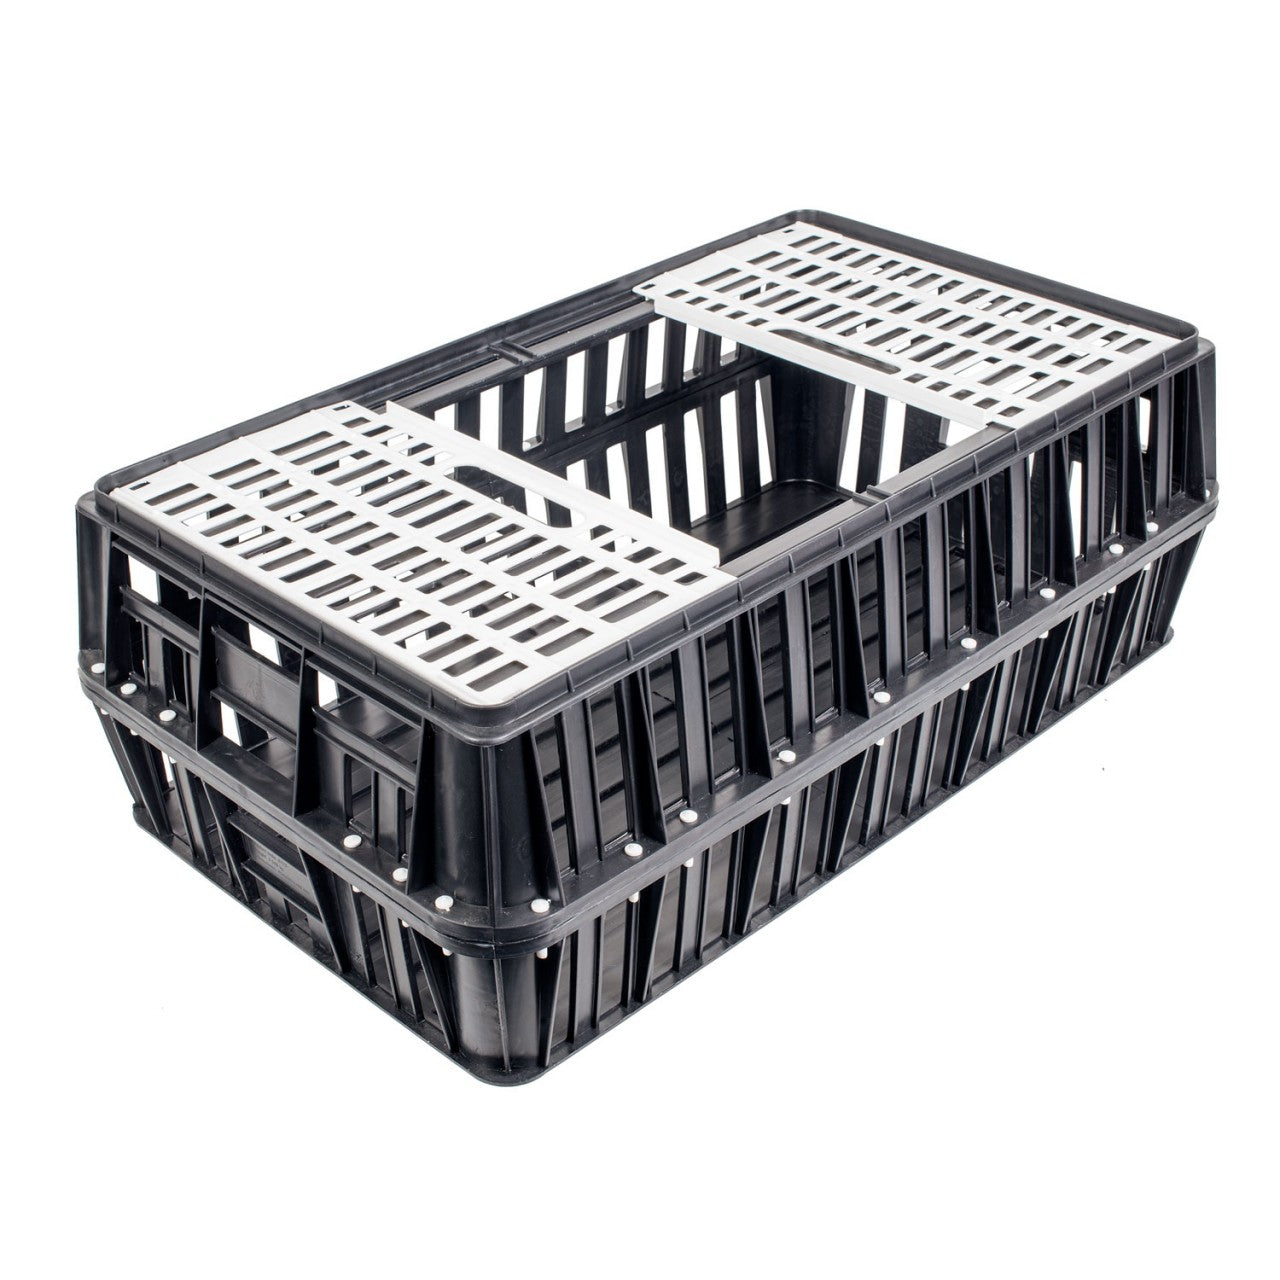 Carrier Box for Poultry, closed Bottom, black - 30cm high